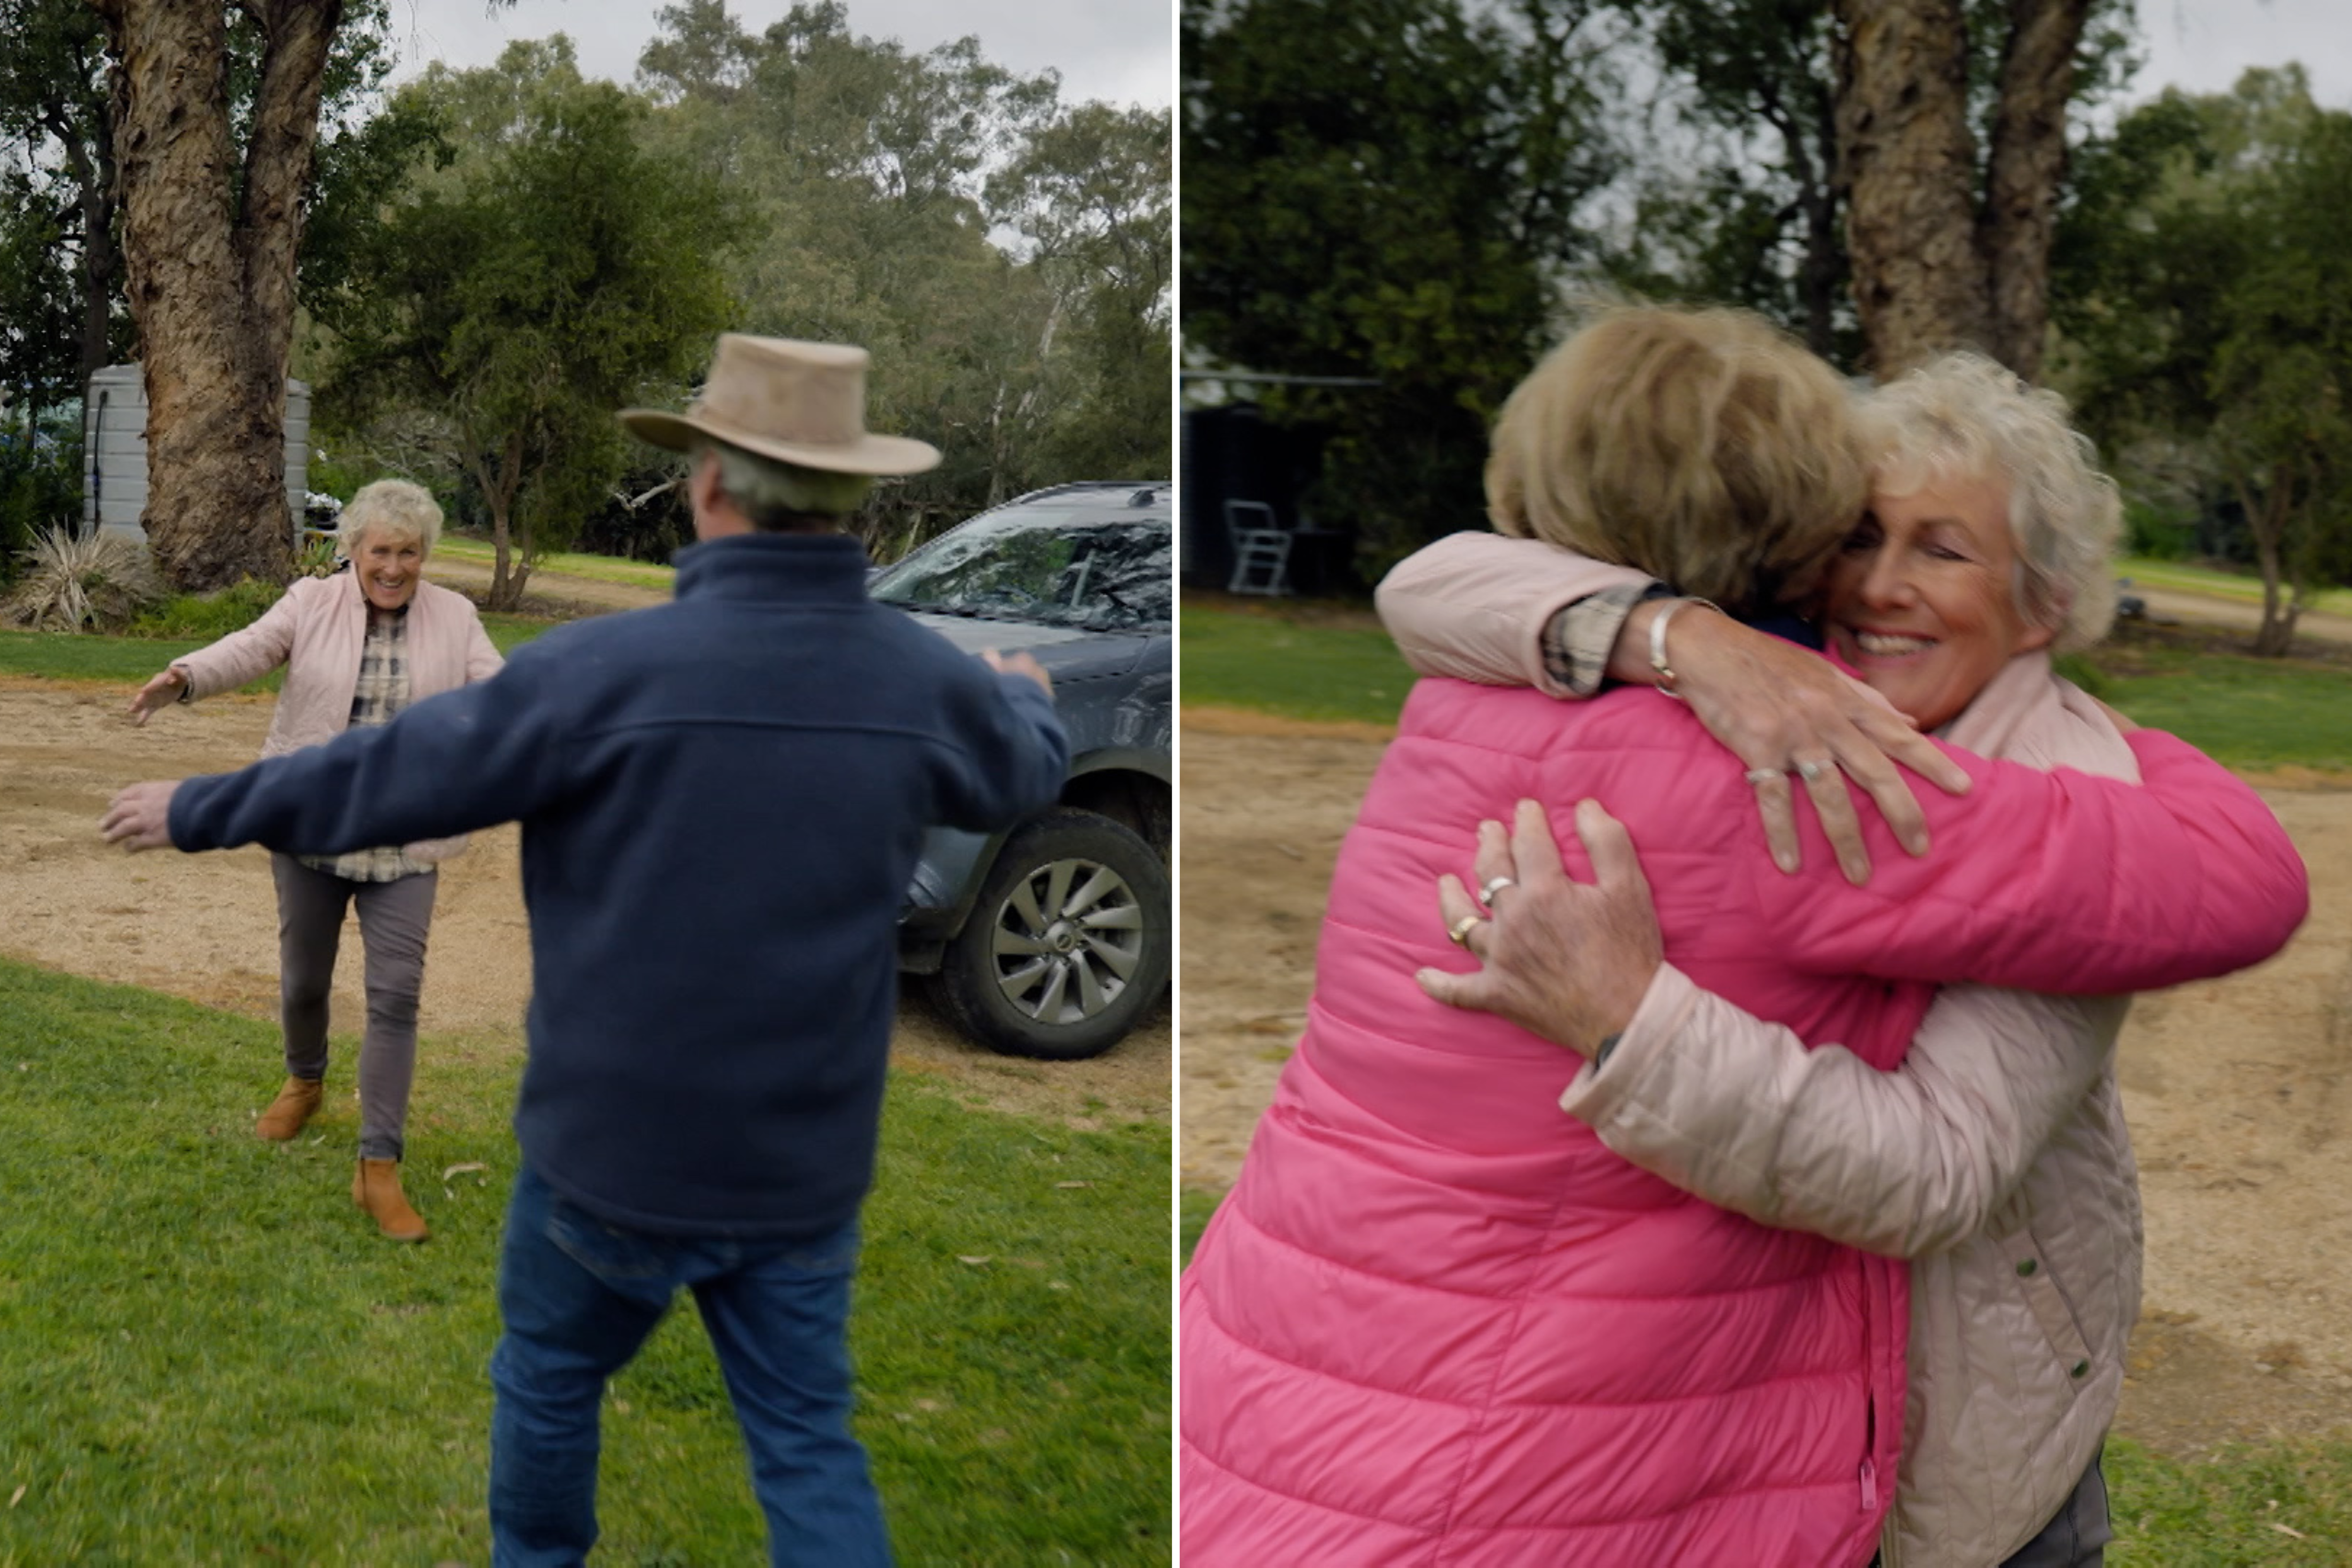 A composite image of Heather Ewart going to hug a man on the left, and hugging a woman on the rightwra locals